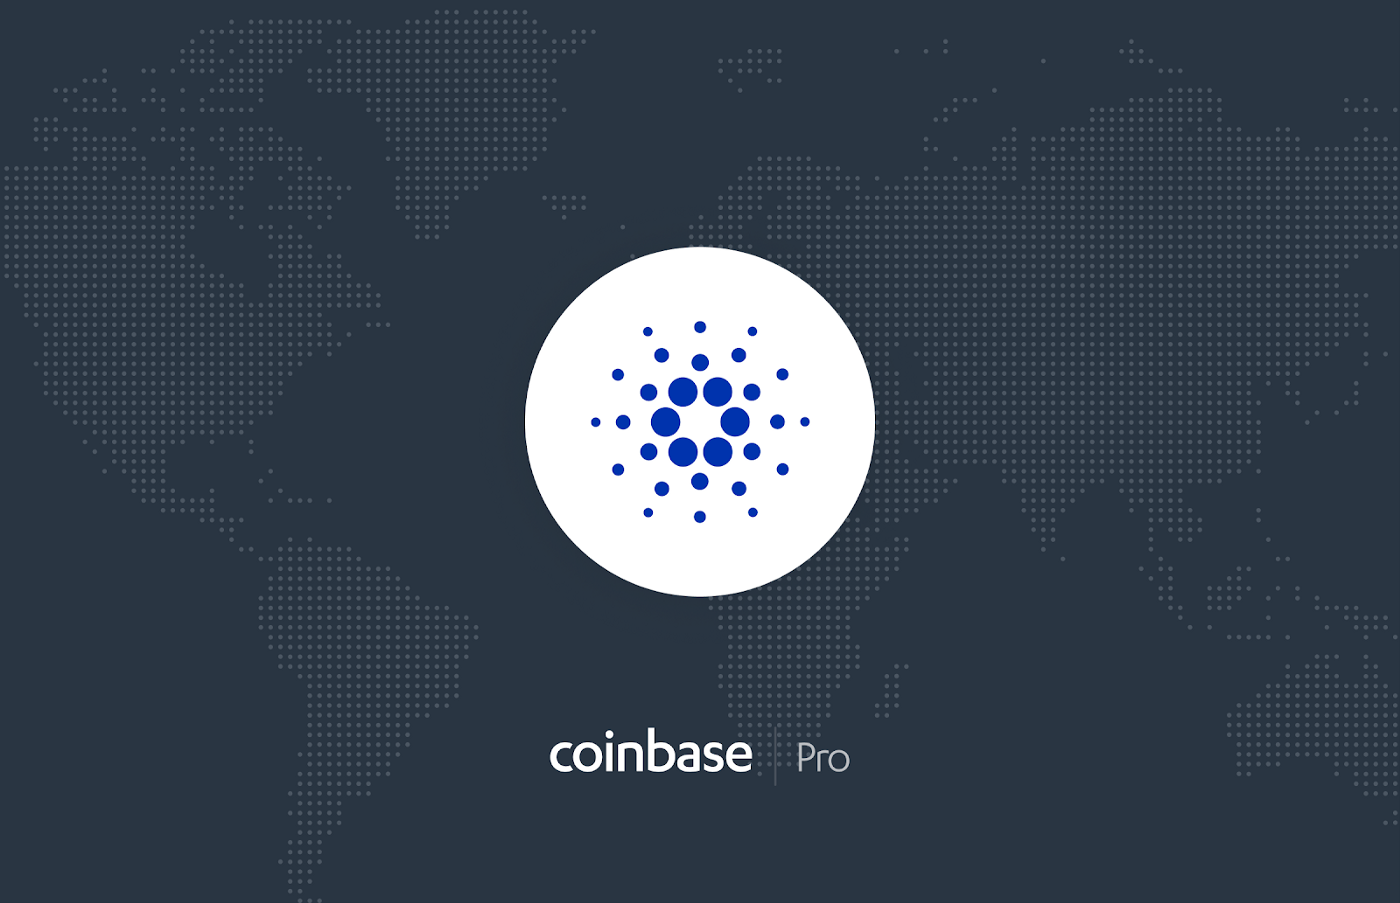 ADA GBP - Coinbase Pro - CryptoCurrencyChart